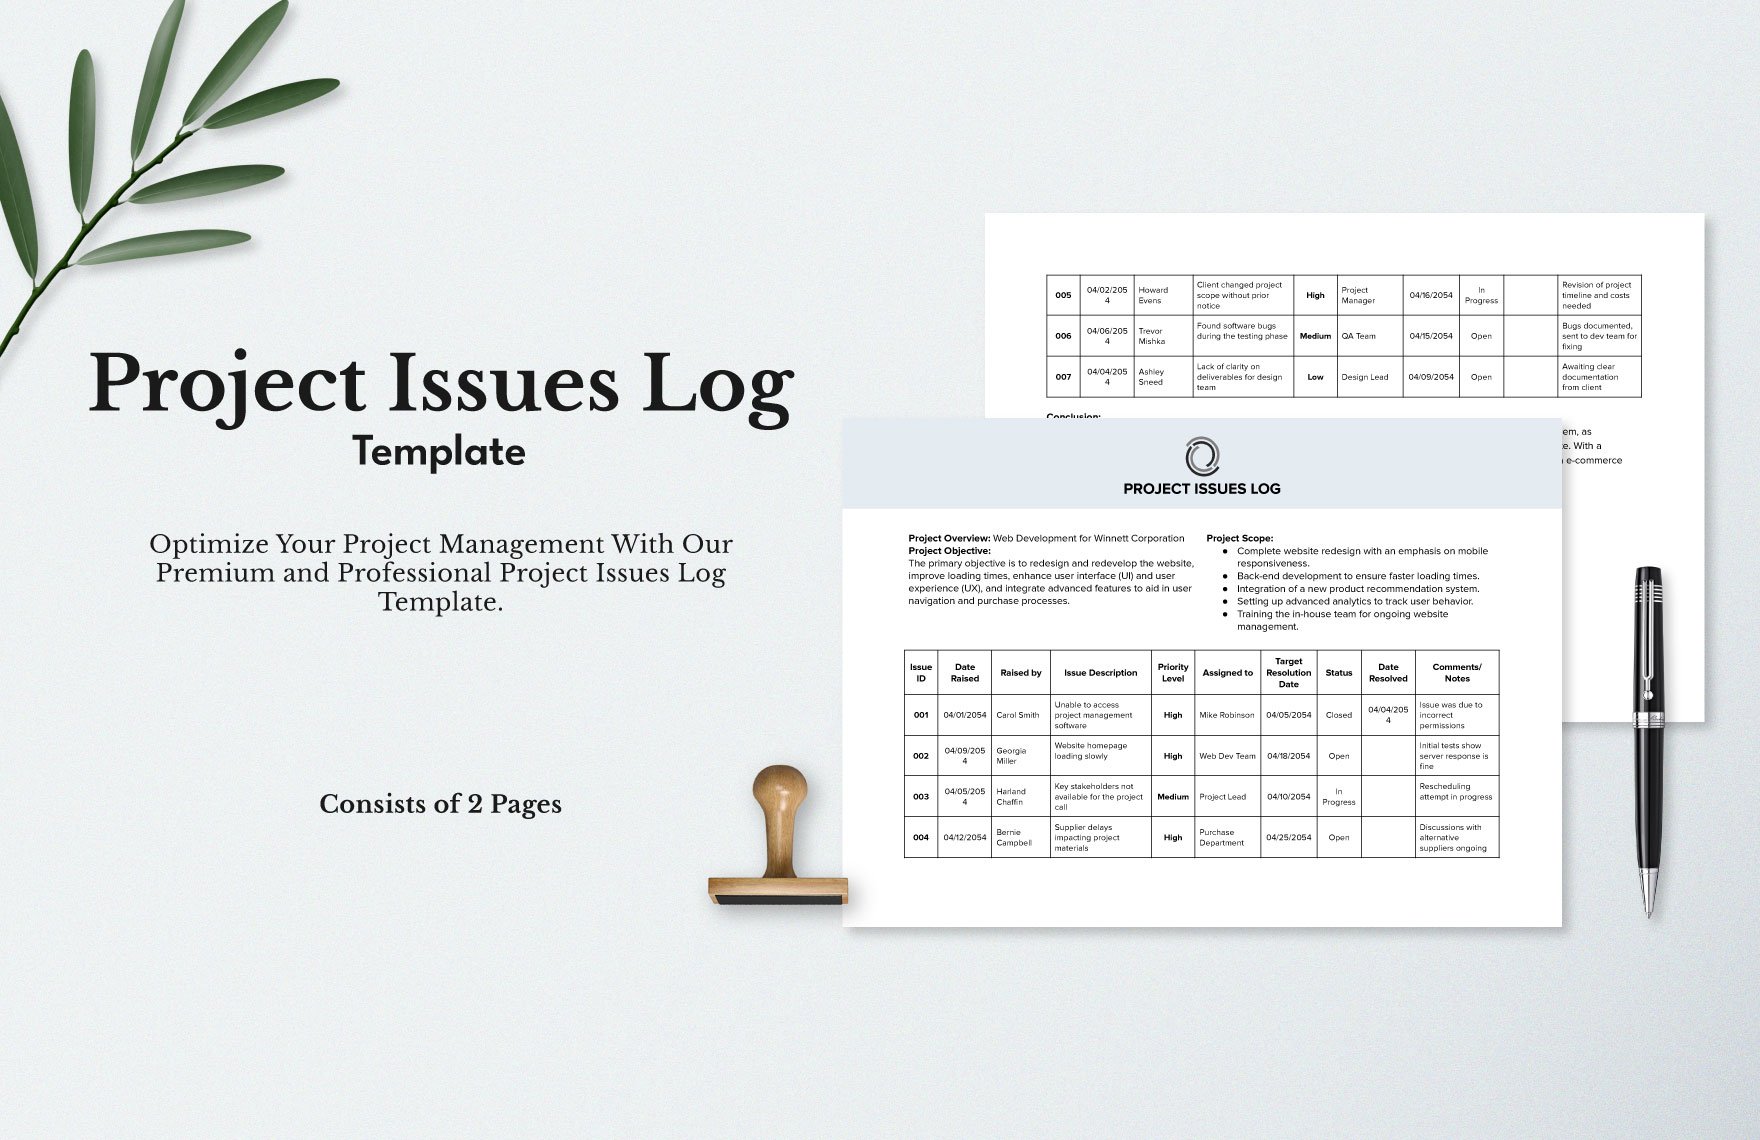 Project Issues Log Template